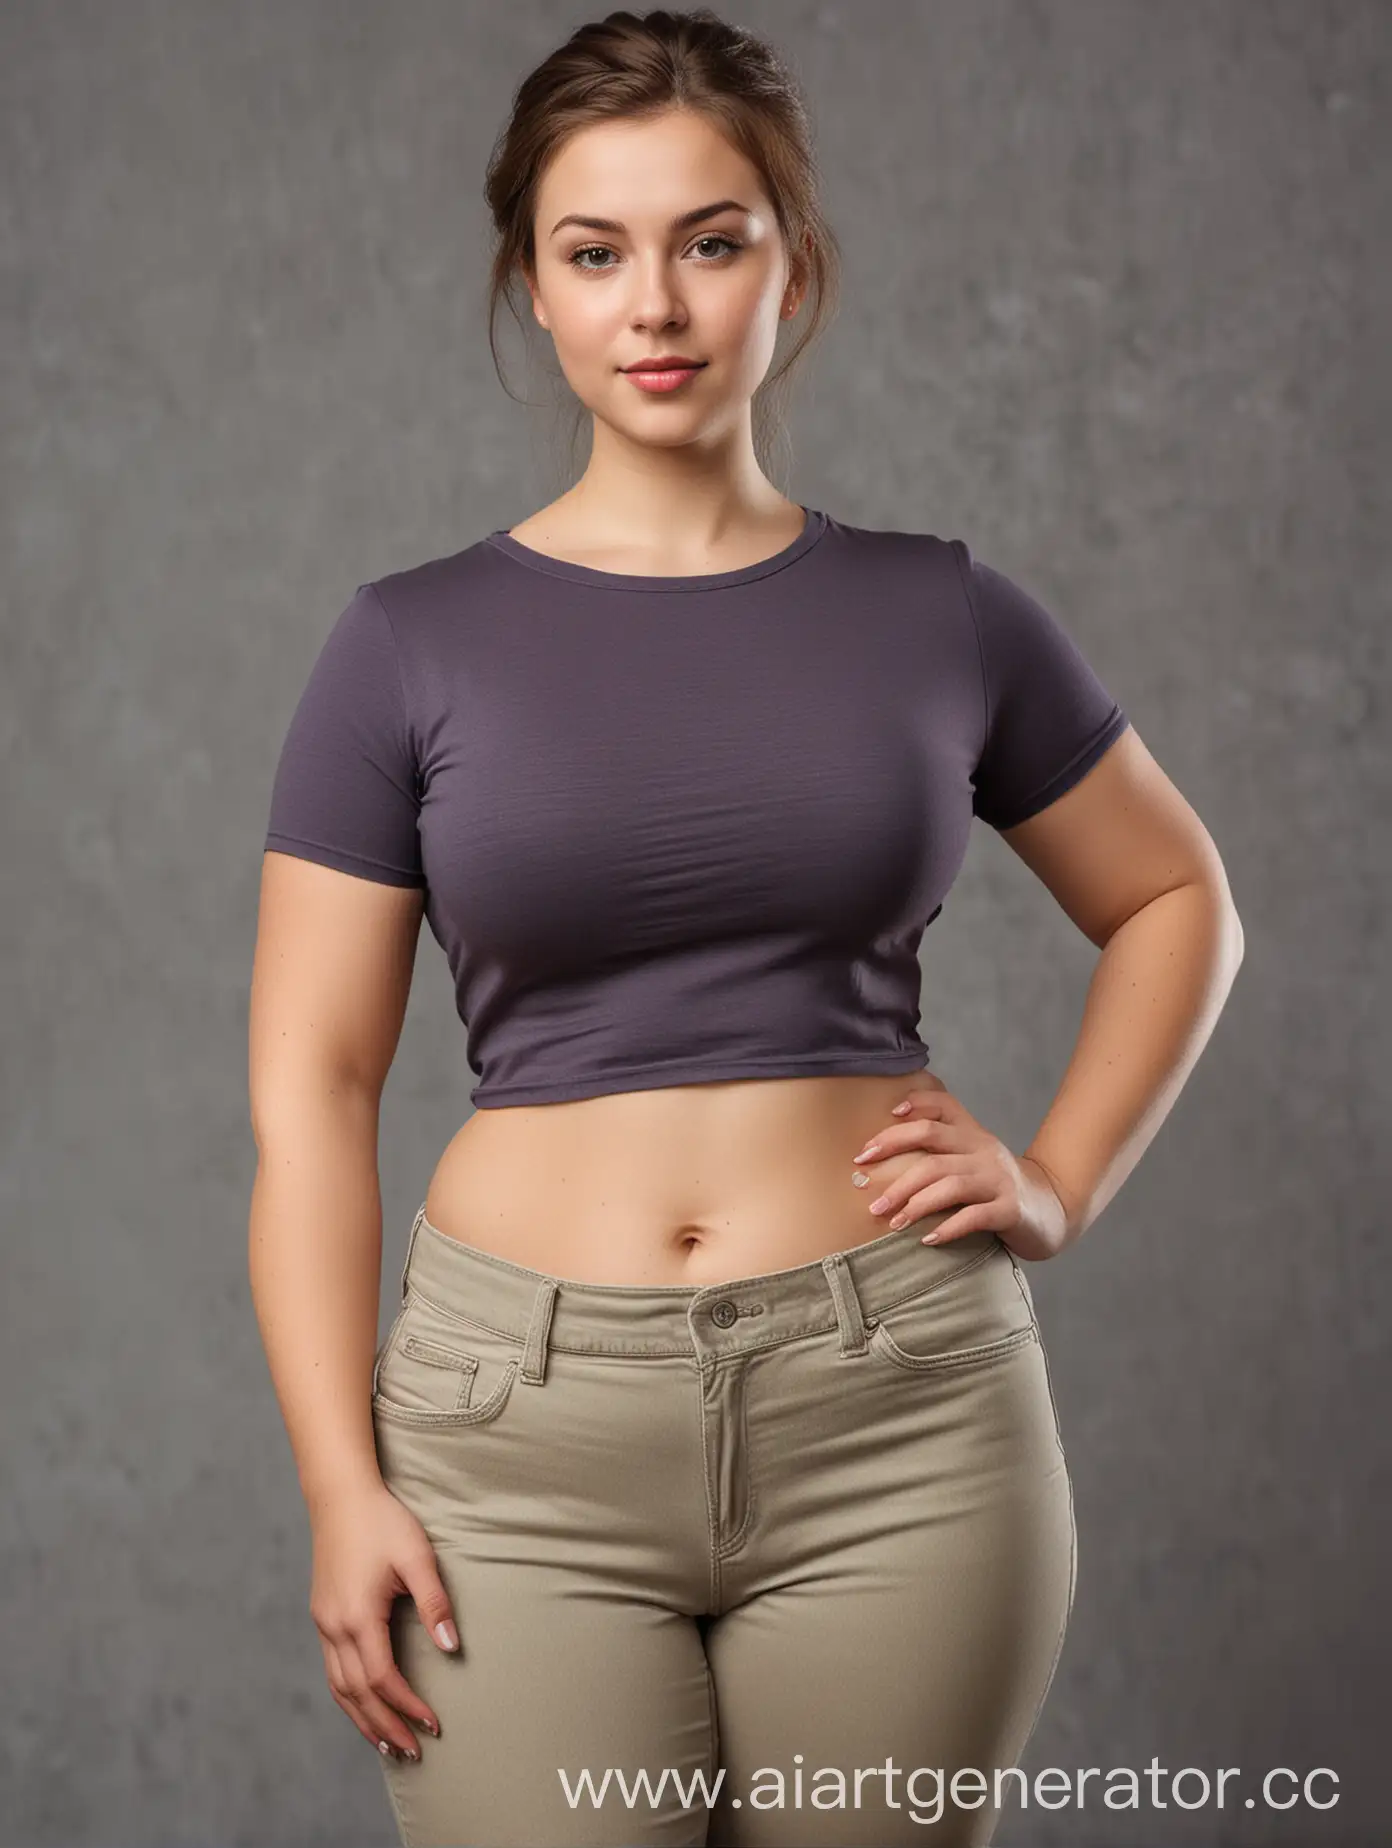 Girl-with-Narrow-Shoulders-and-Curvy-Hips-in-Stylish-Top